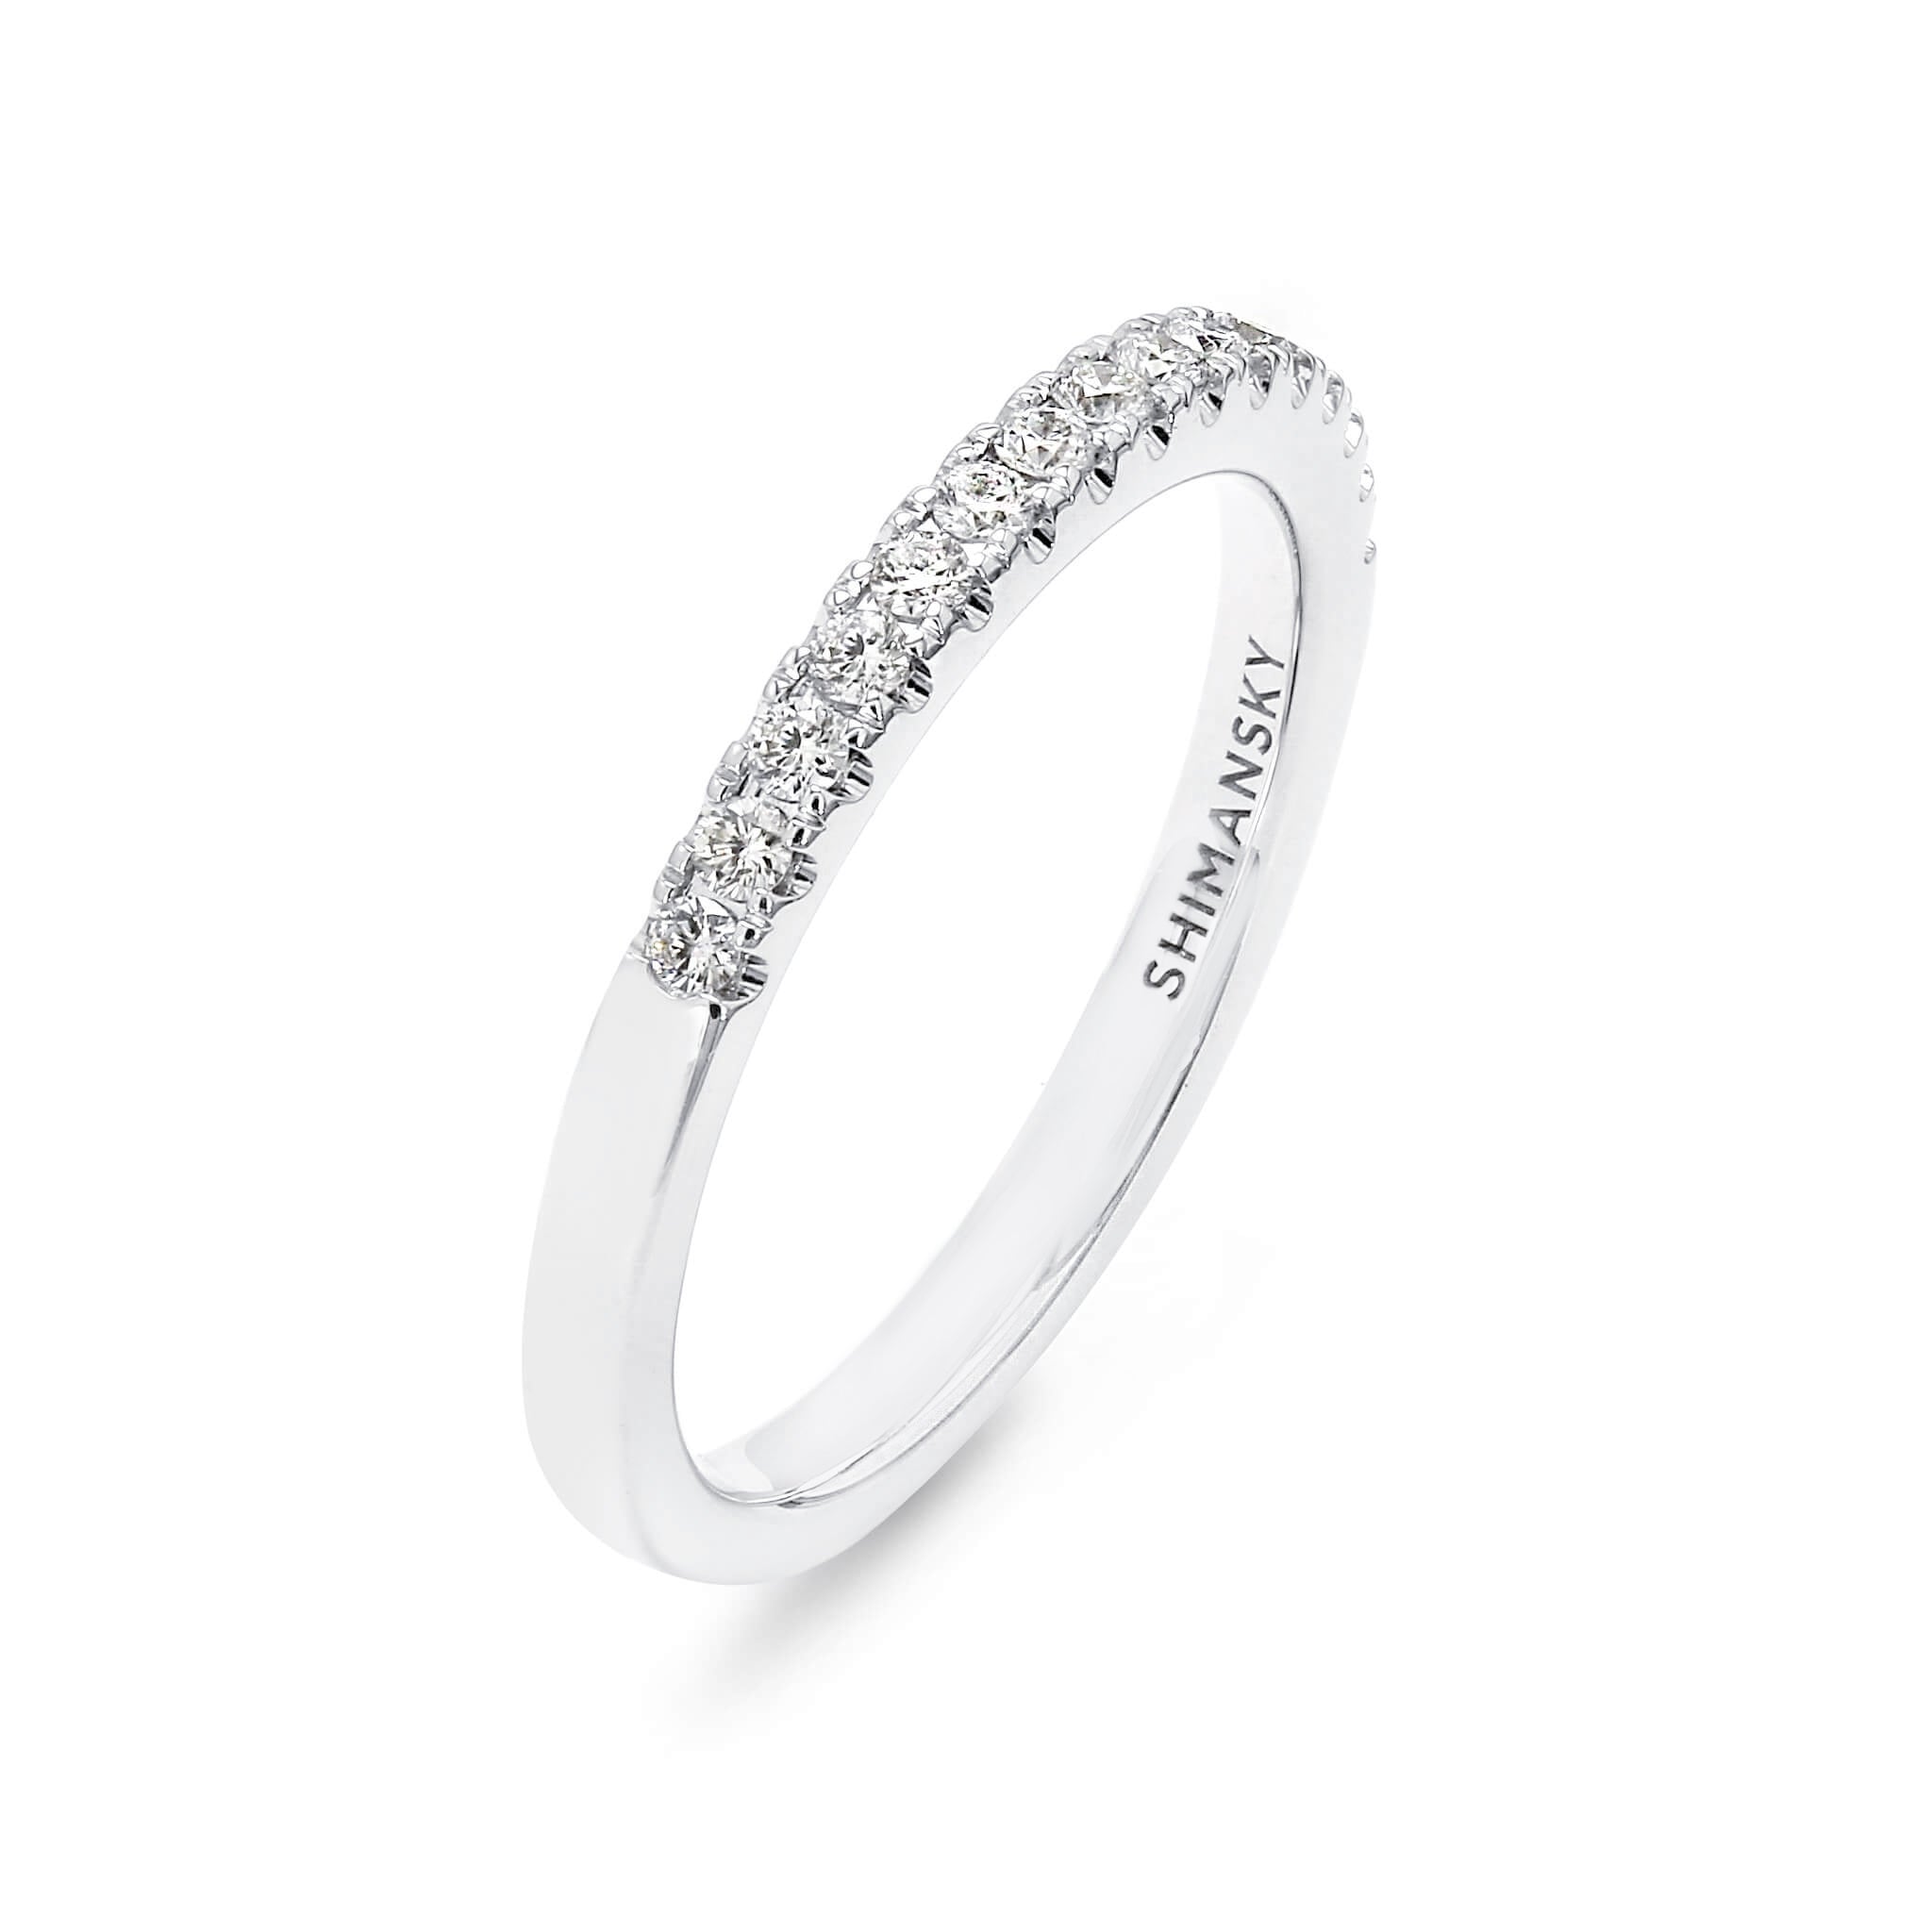 Shimansky - Ladies Diamond Wedding Band Crafted in 18K White Gold